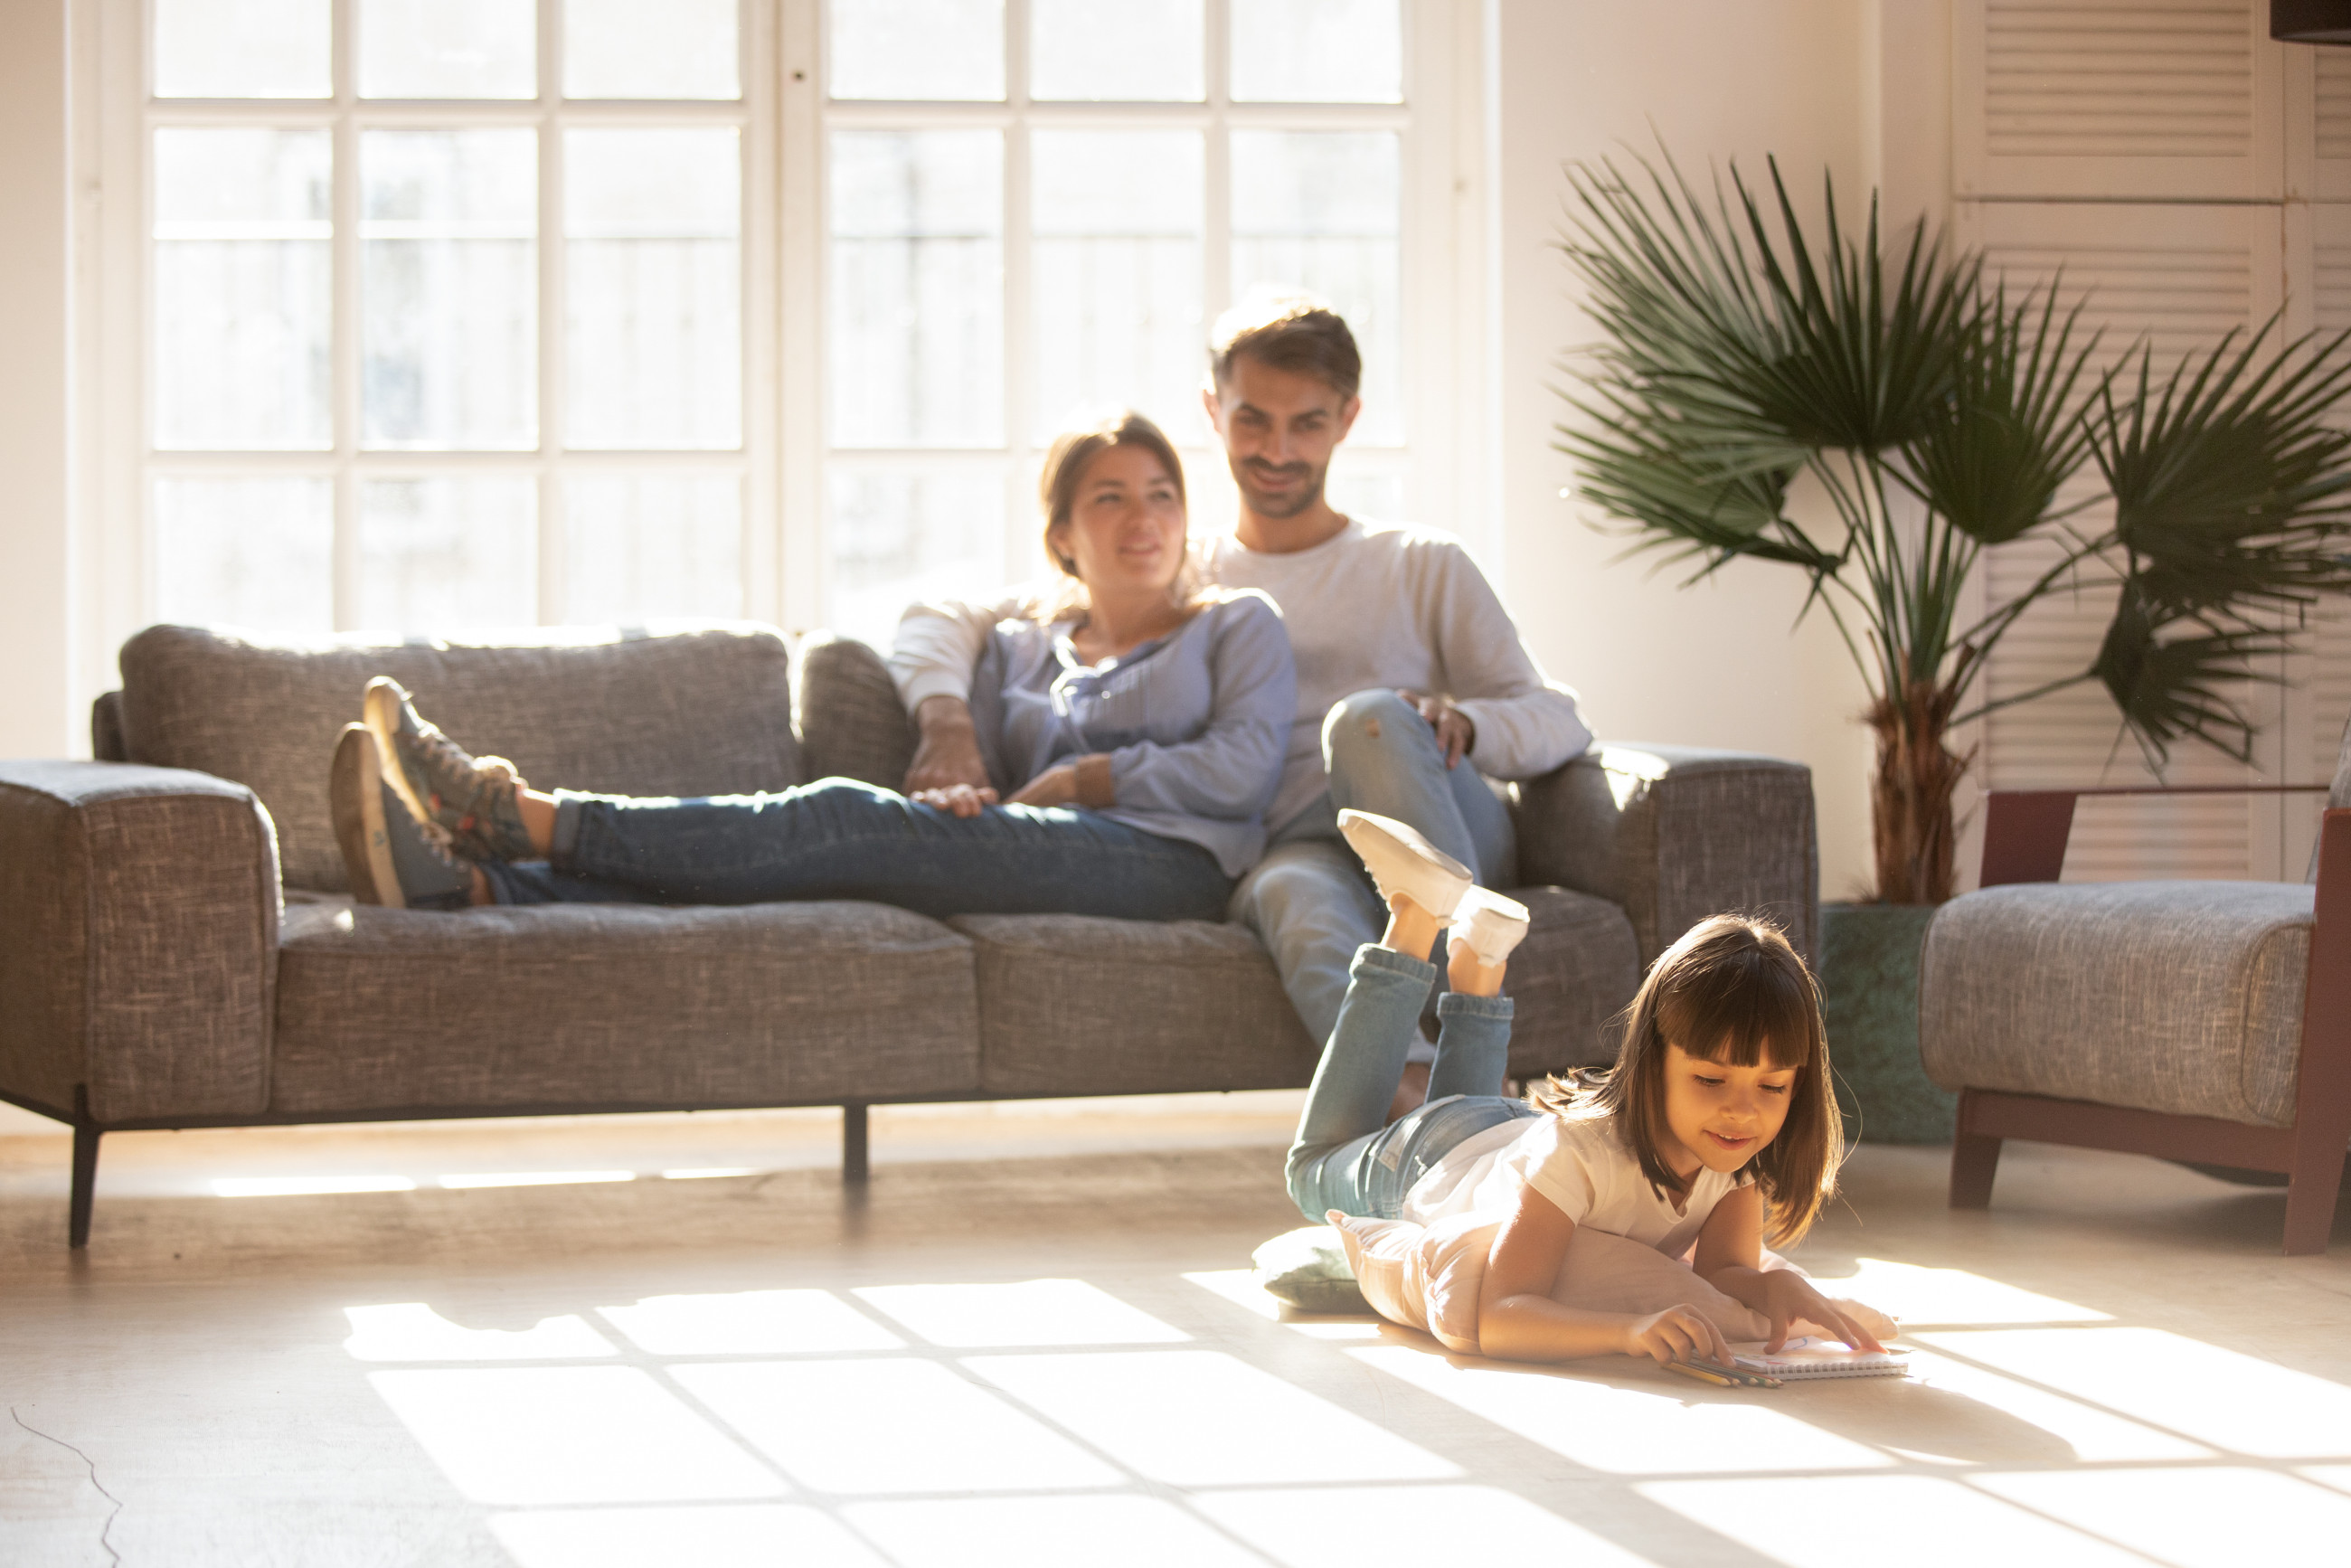 A family relaxing in their living room with the sun coming in from double glazed window